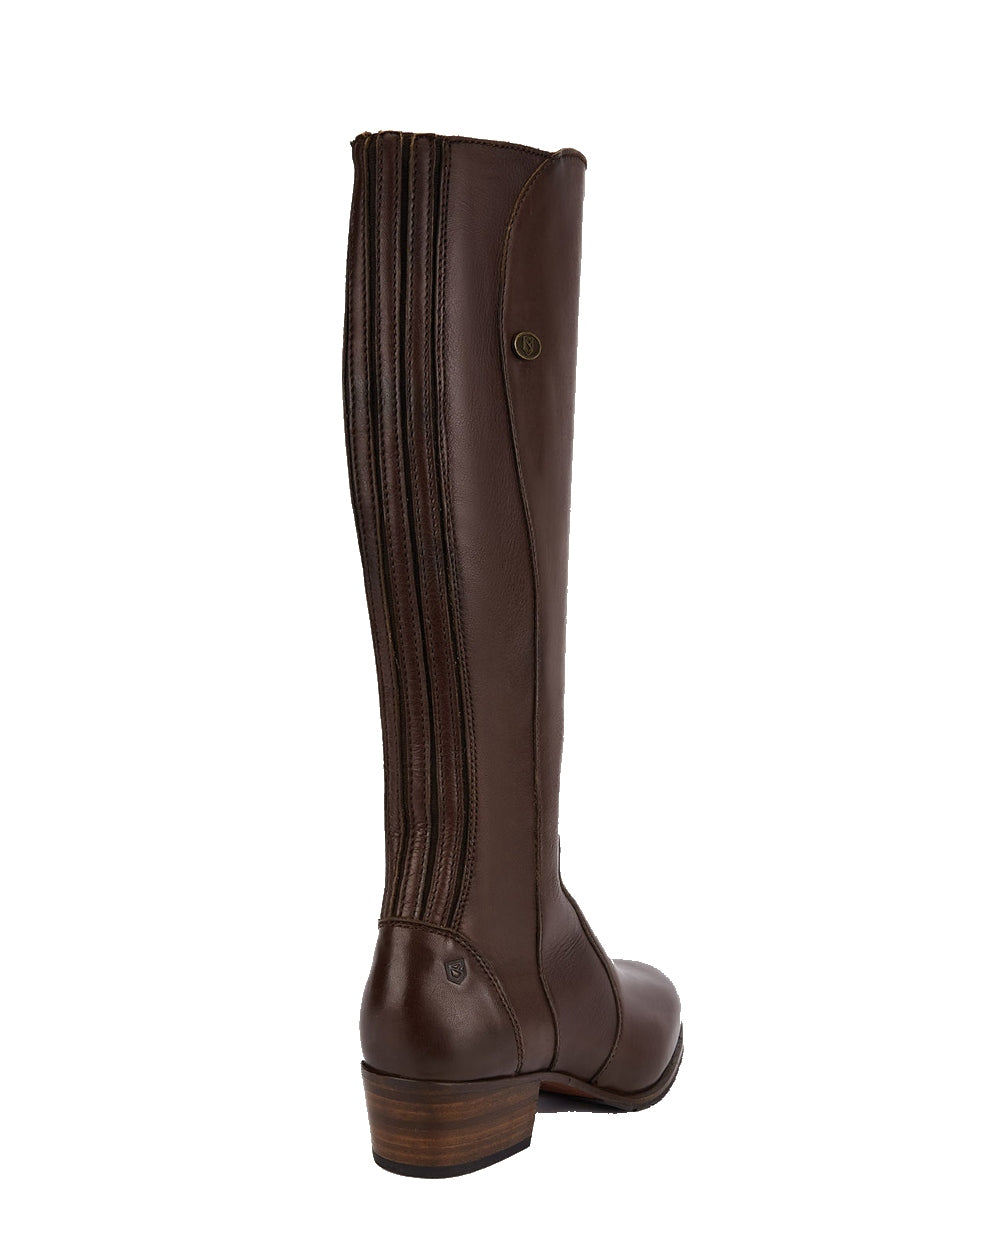 Dubarry Downpatrick Knee High Boots in Old Rum 